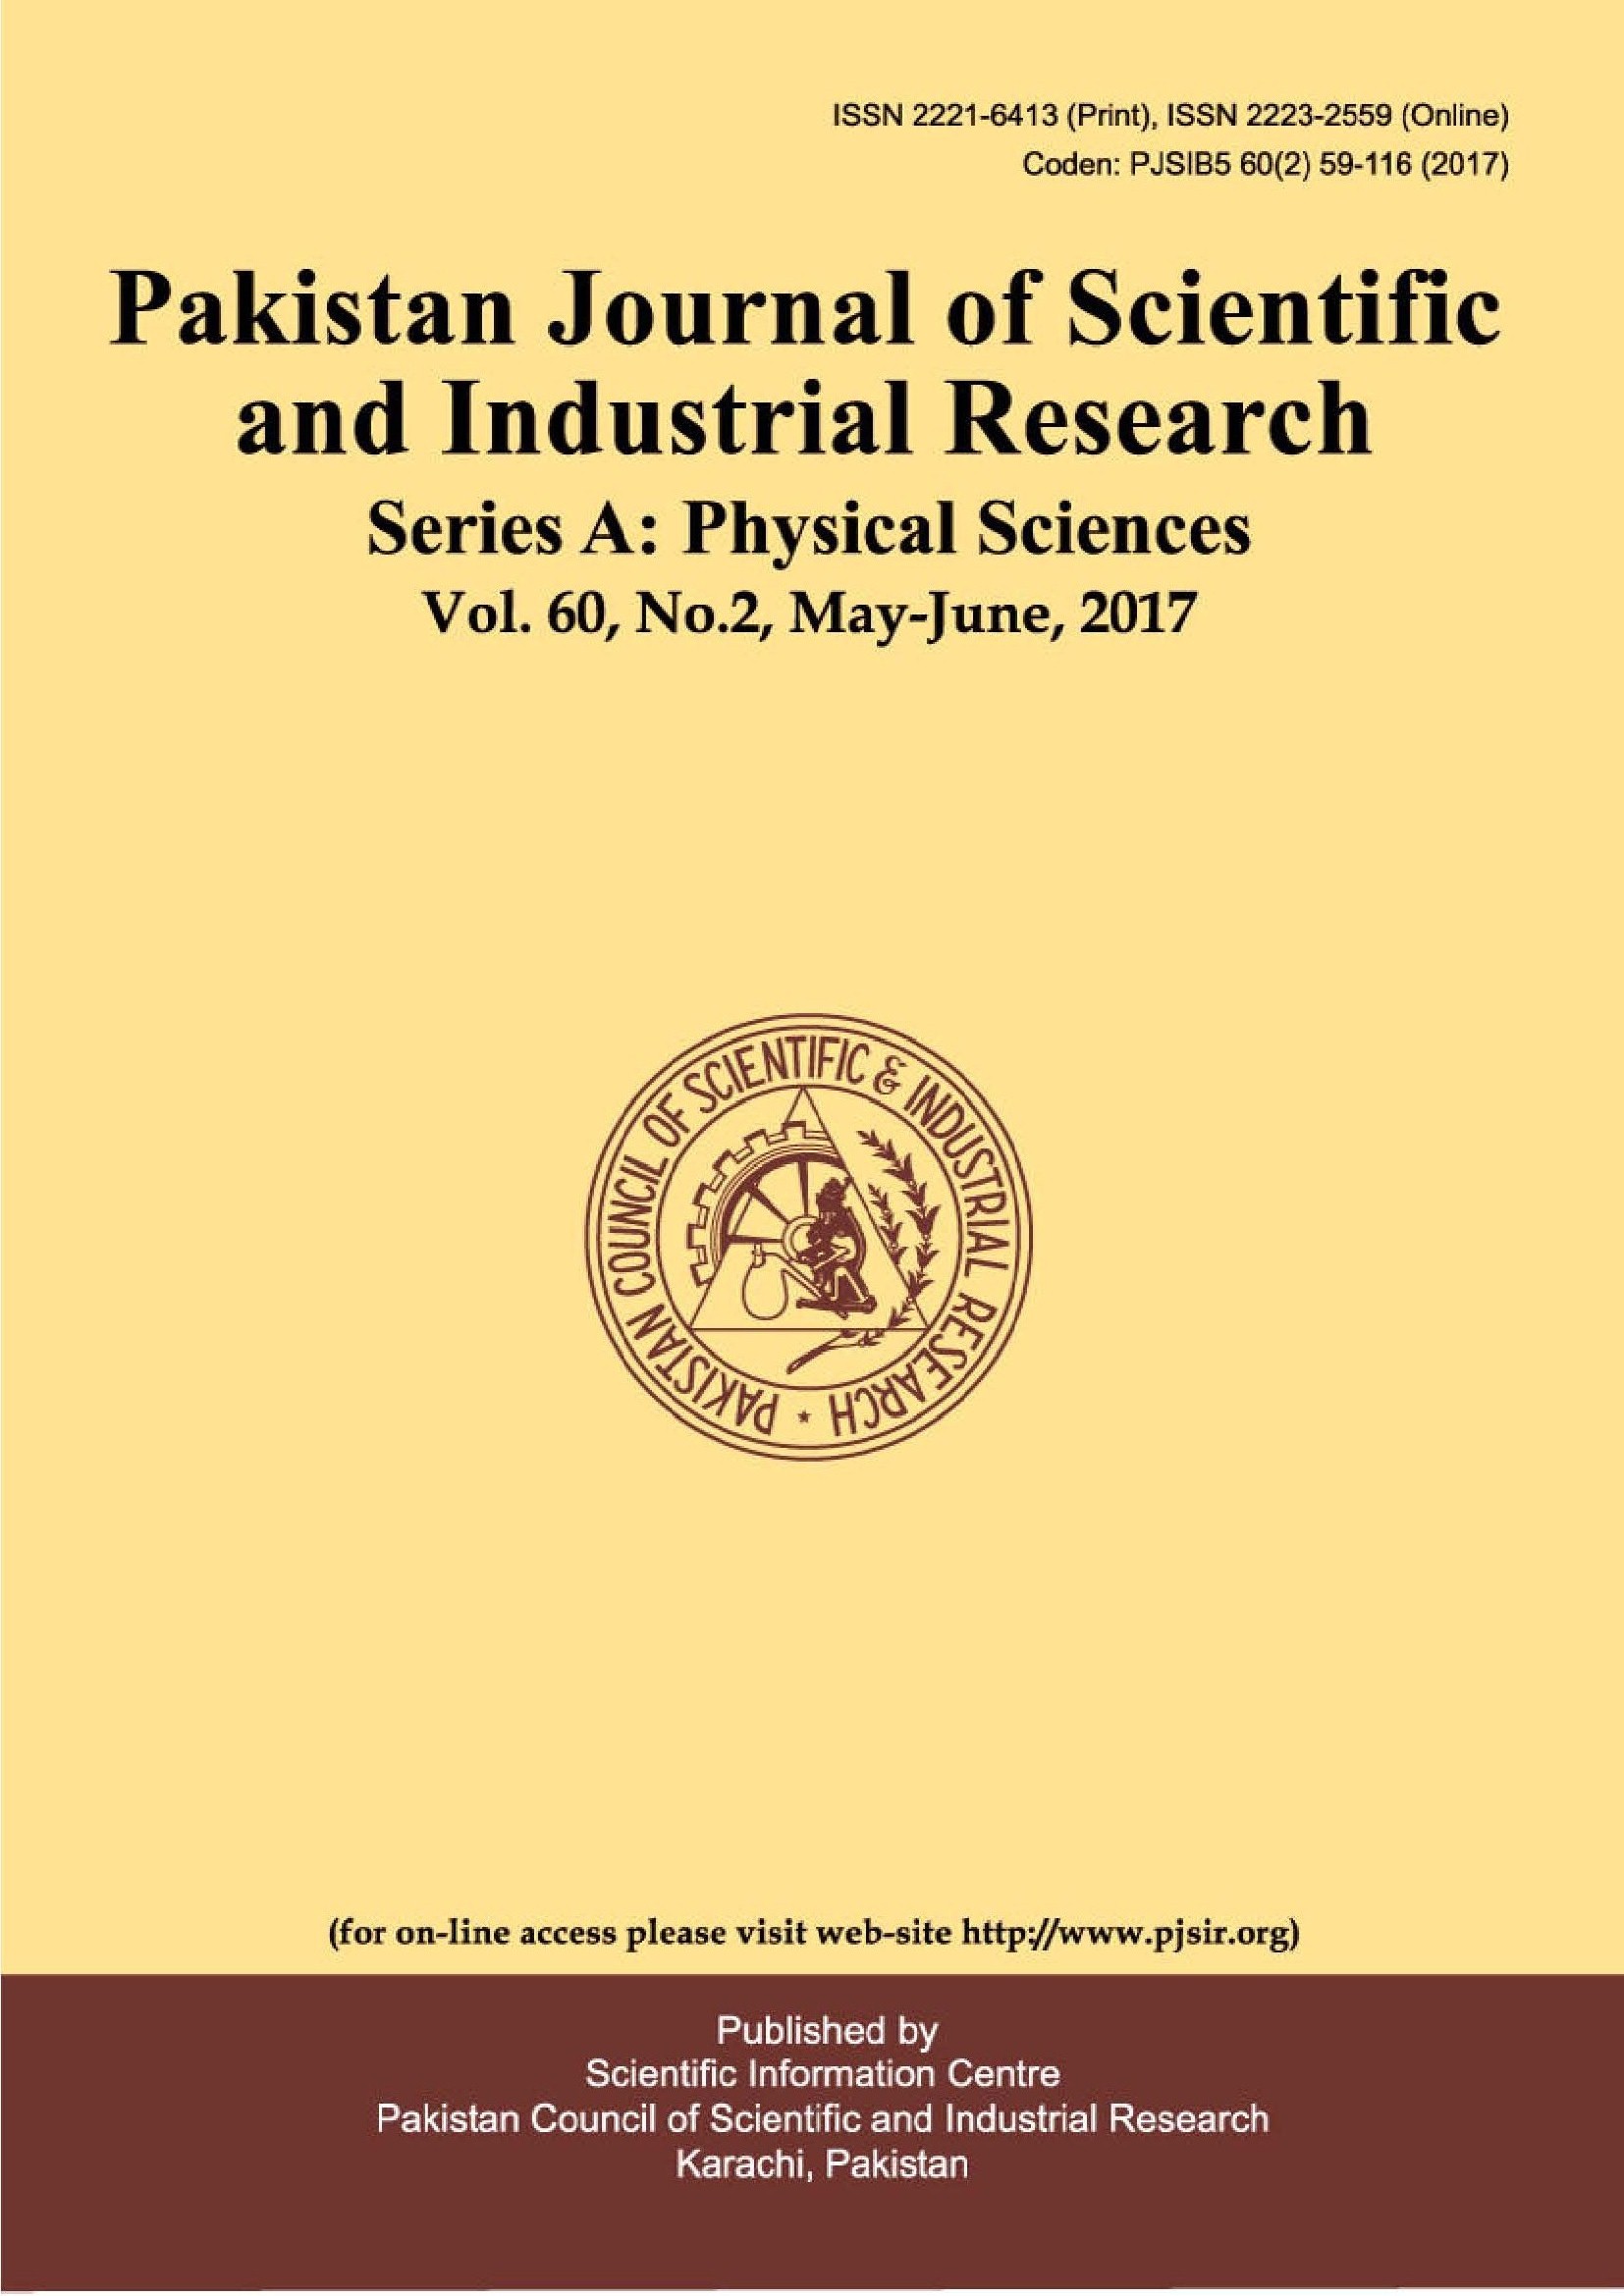 					View Vol. 60 No. 2 (2017): Pakistan Journal of Scientific and Industrial Research Series A: Physical Sciences
				